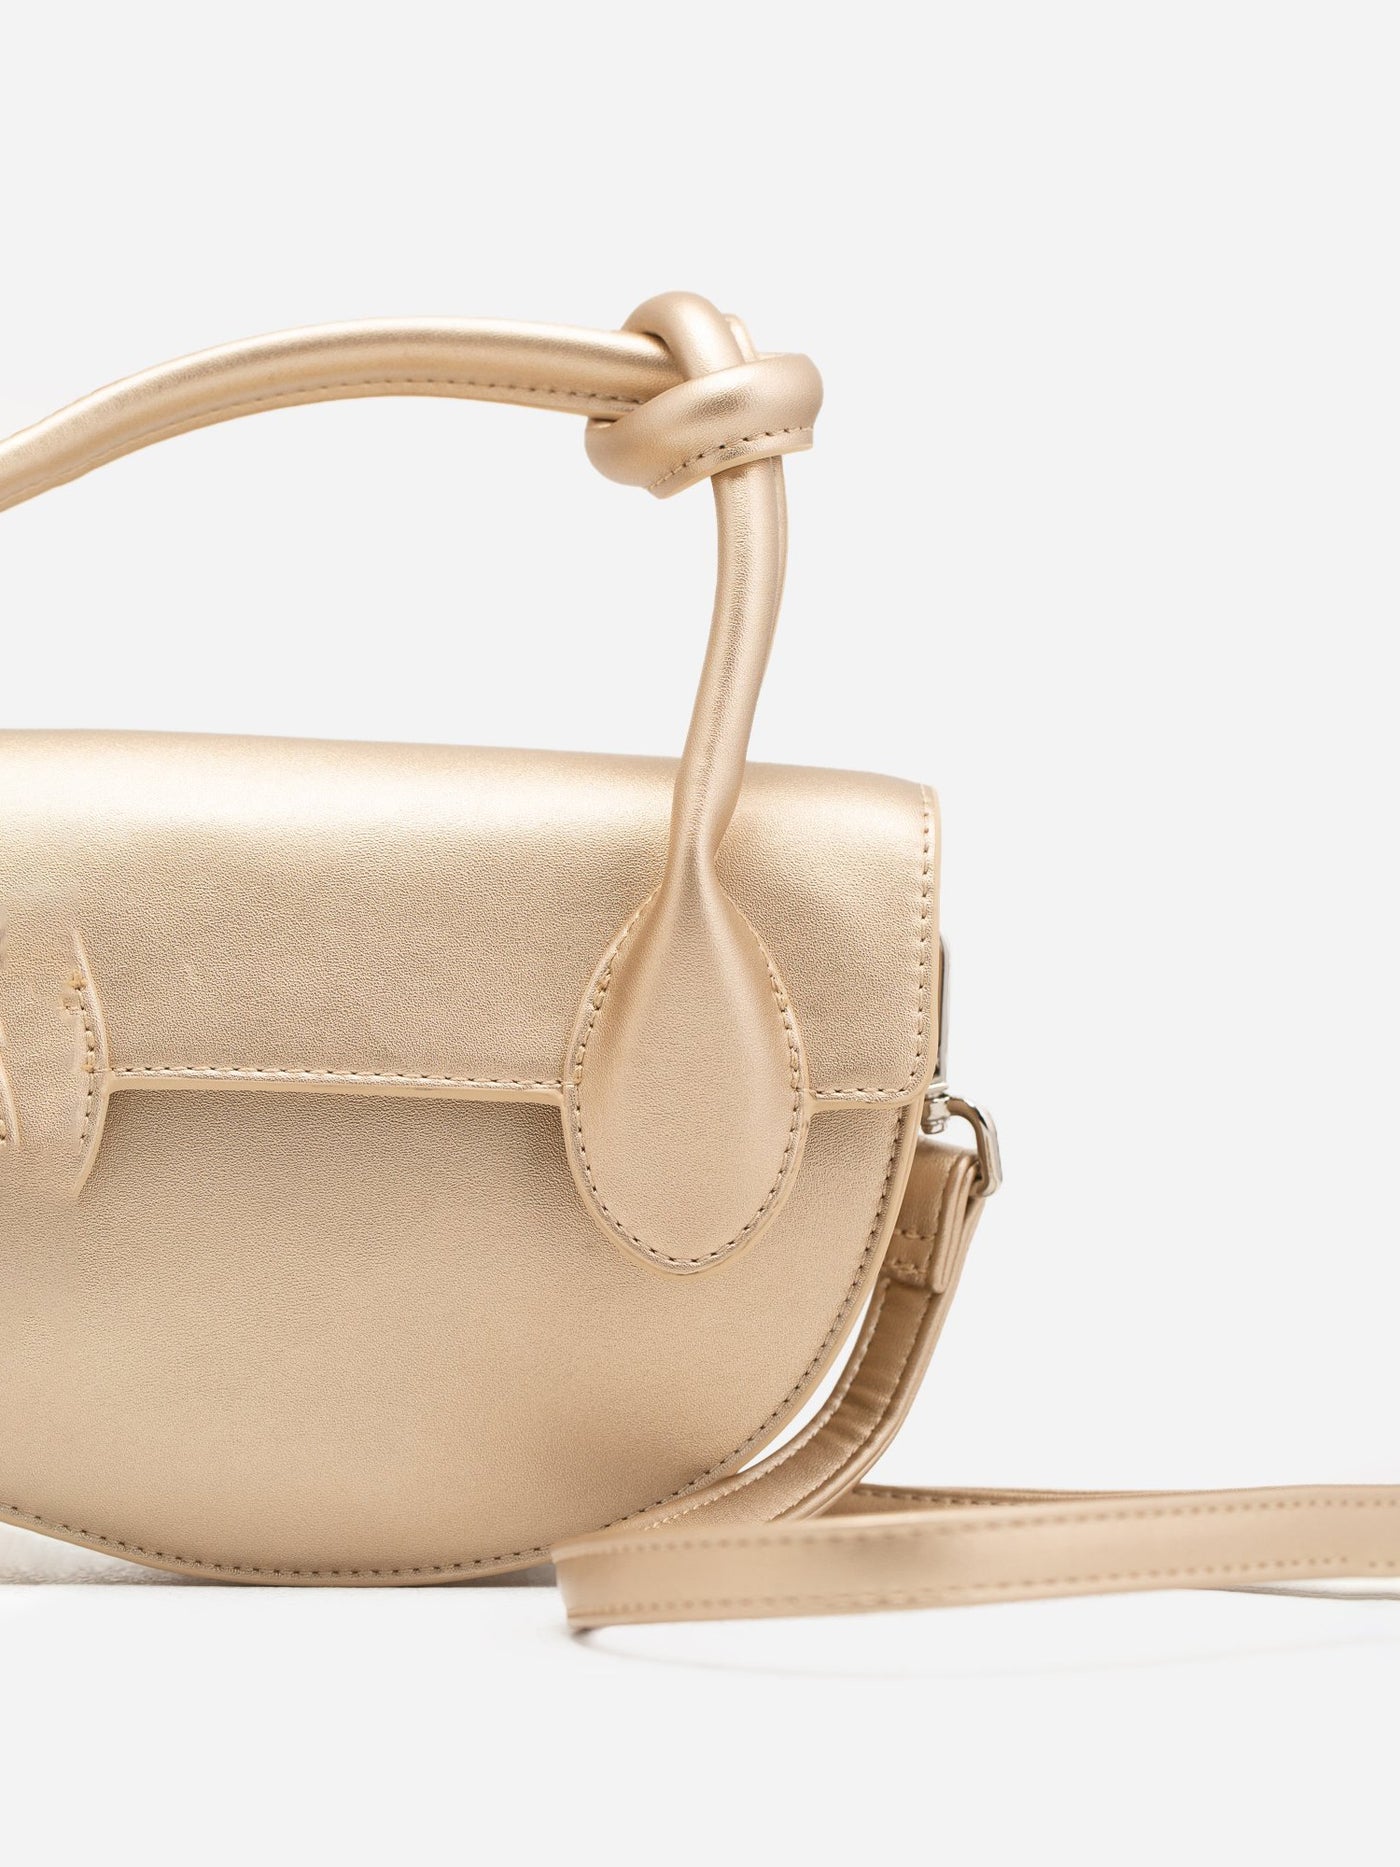 Crossbody Bag - Knotted Handle